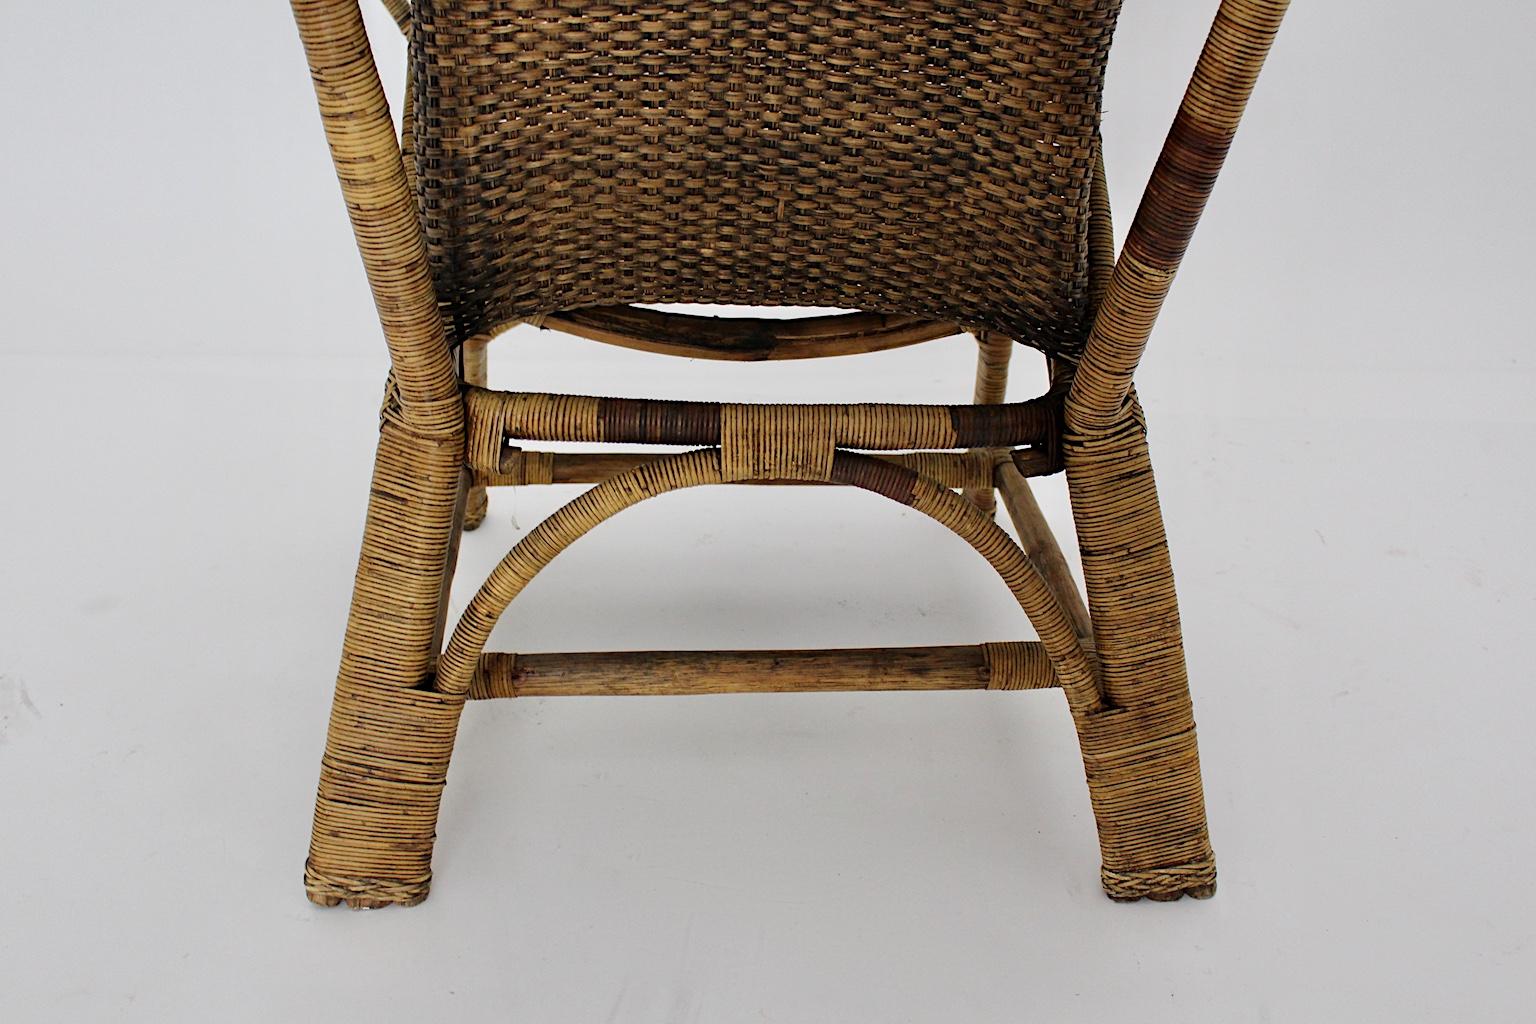 Organic Arts & Crafts Vintage Wicker Rattan Armchair Dryad and Co circa 1910 UK For Sale 4